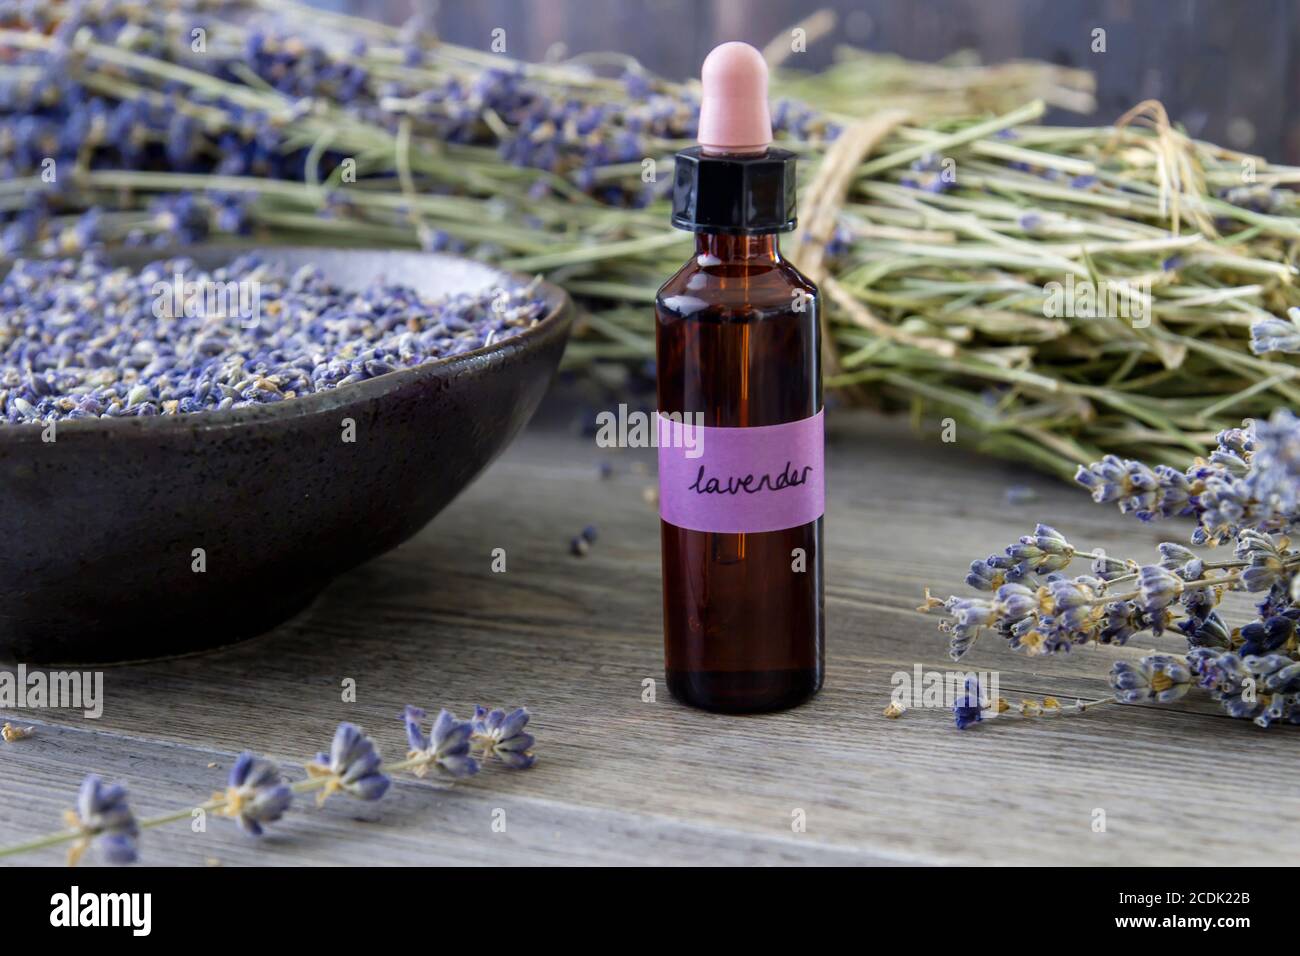 Natural lavender oil on glass dropper bottle and lavender dried flowers Stock Photo